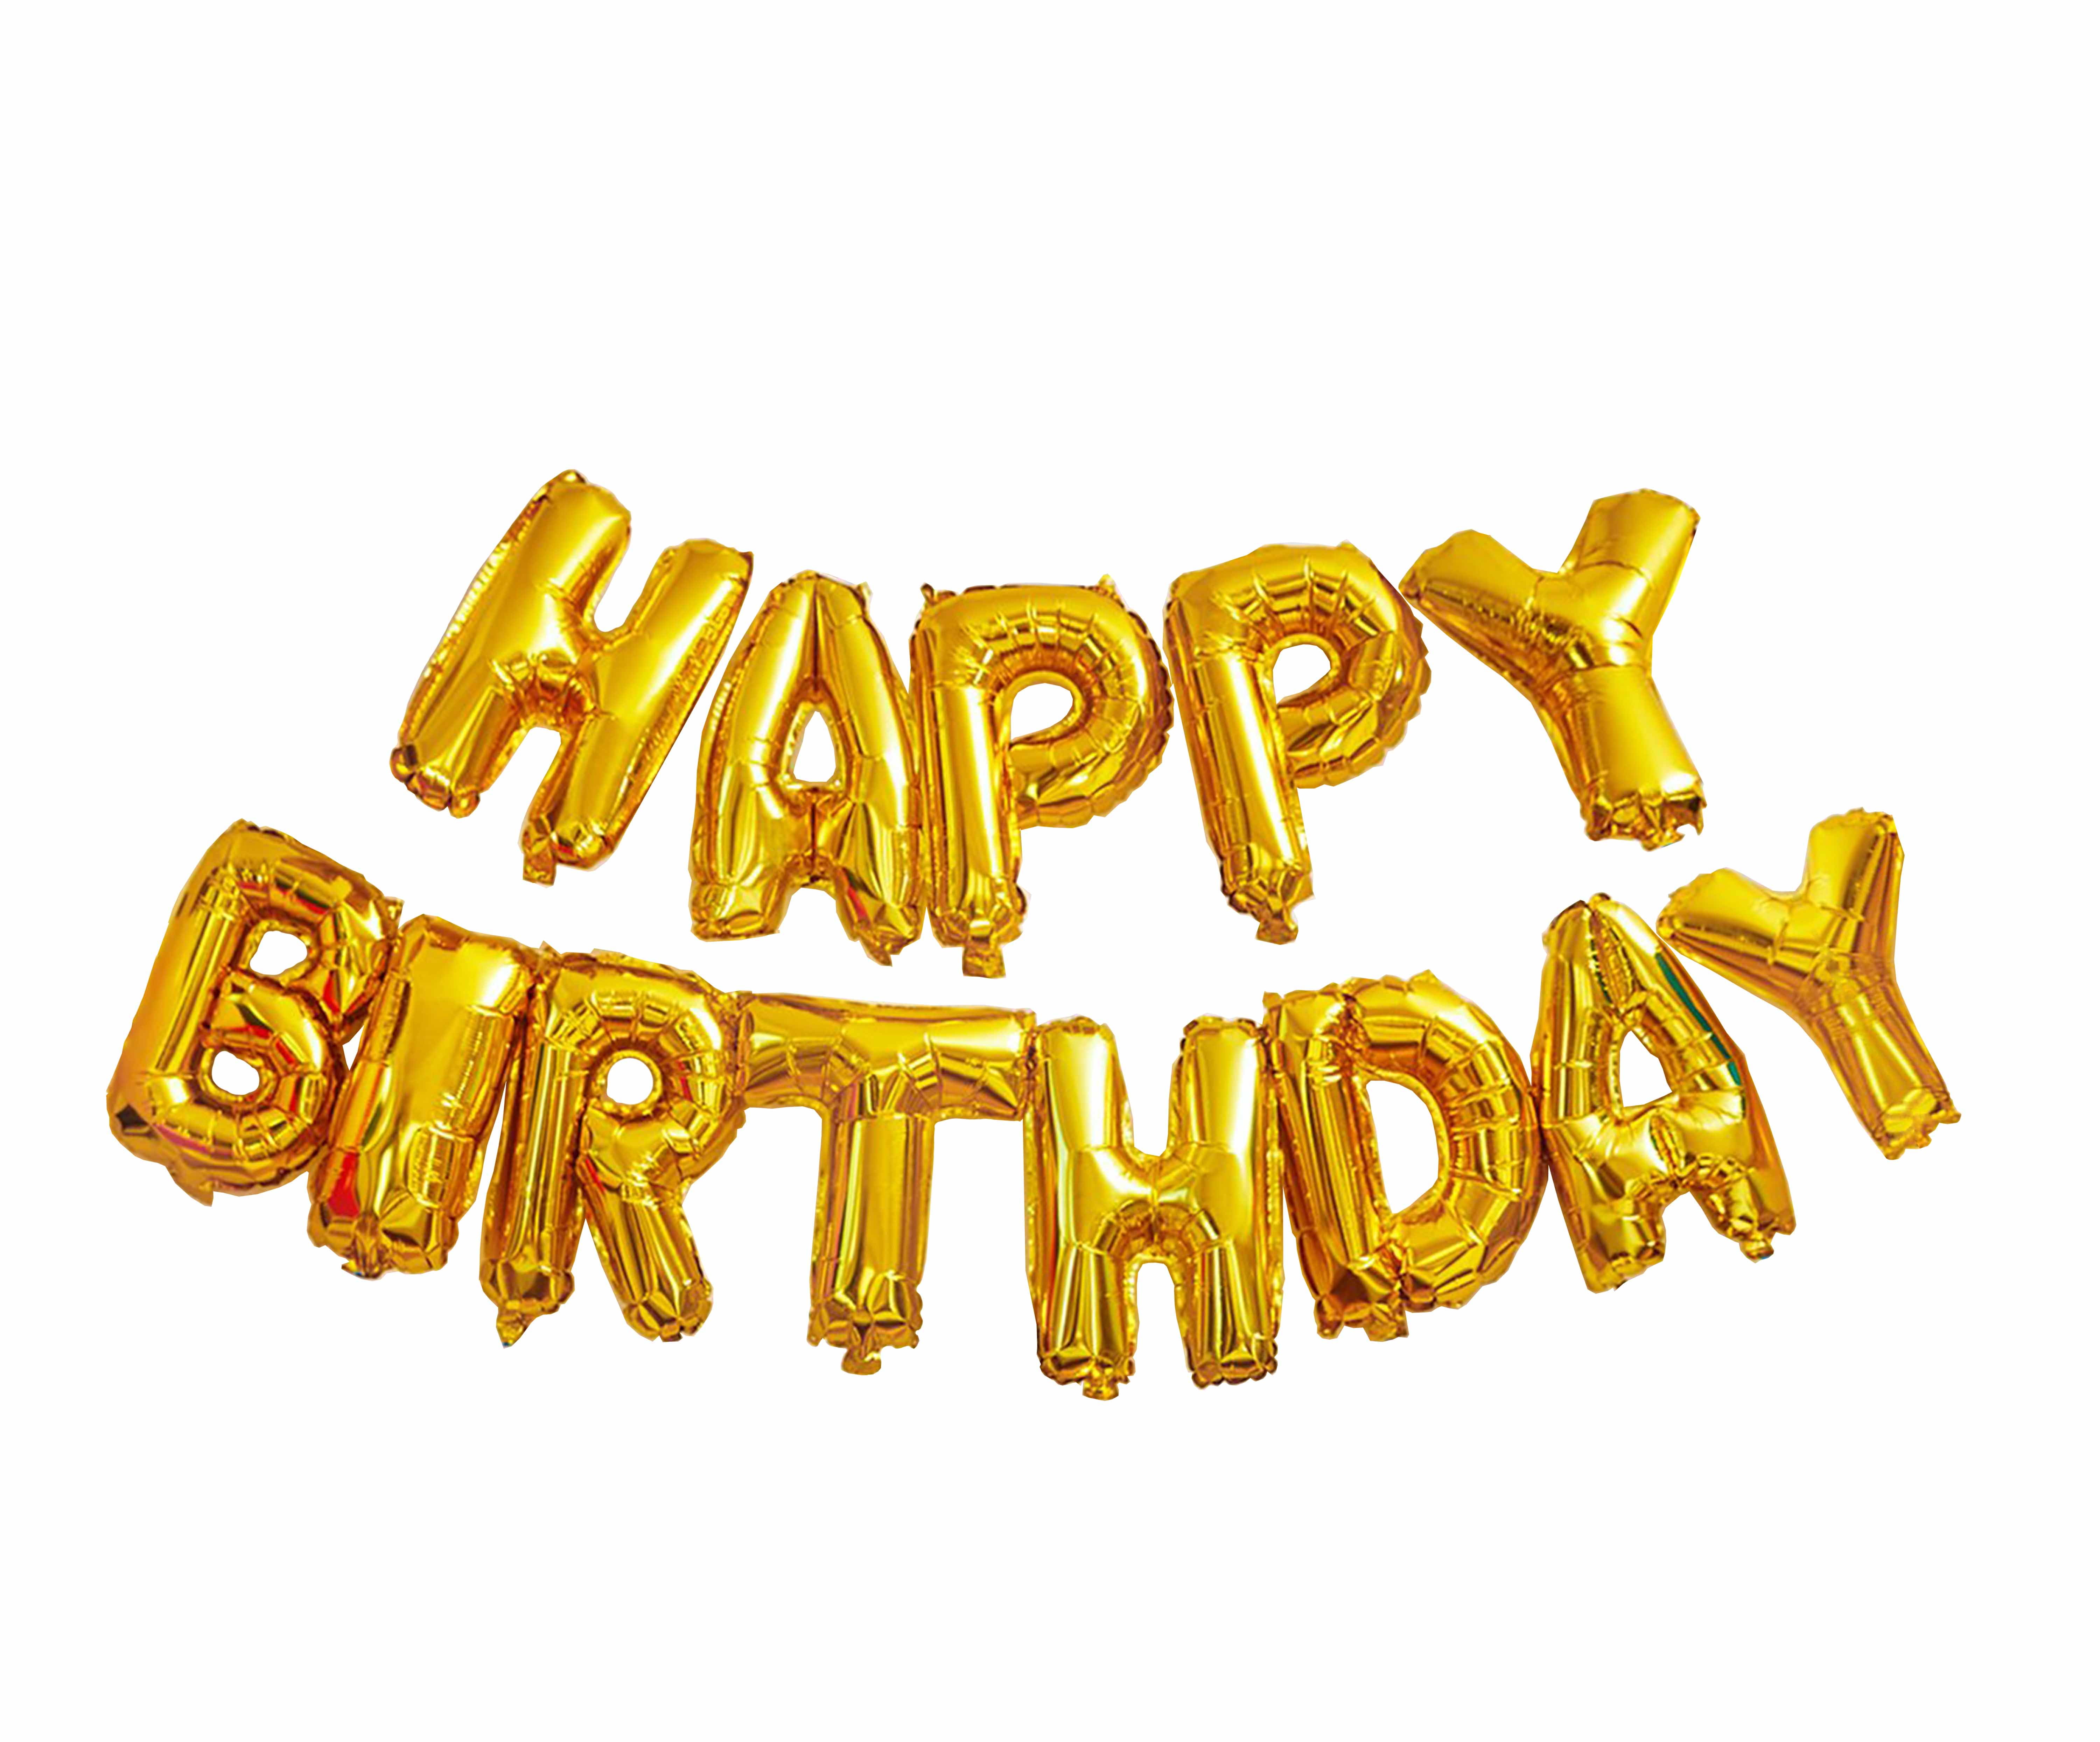 Happy Birthday Balloon Banner Bunting Party Self Inflating Letters Foil Balloons 